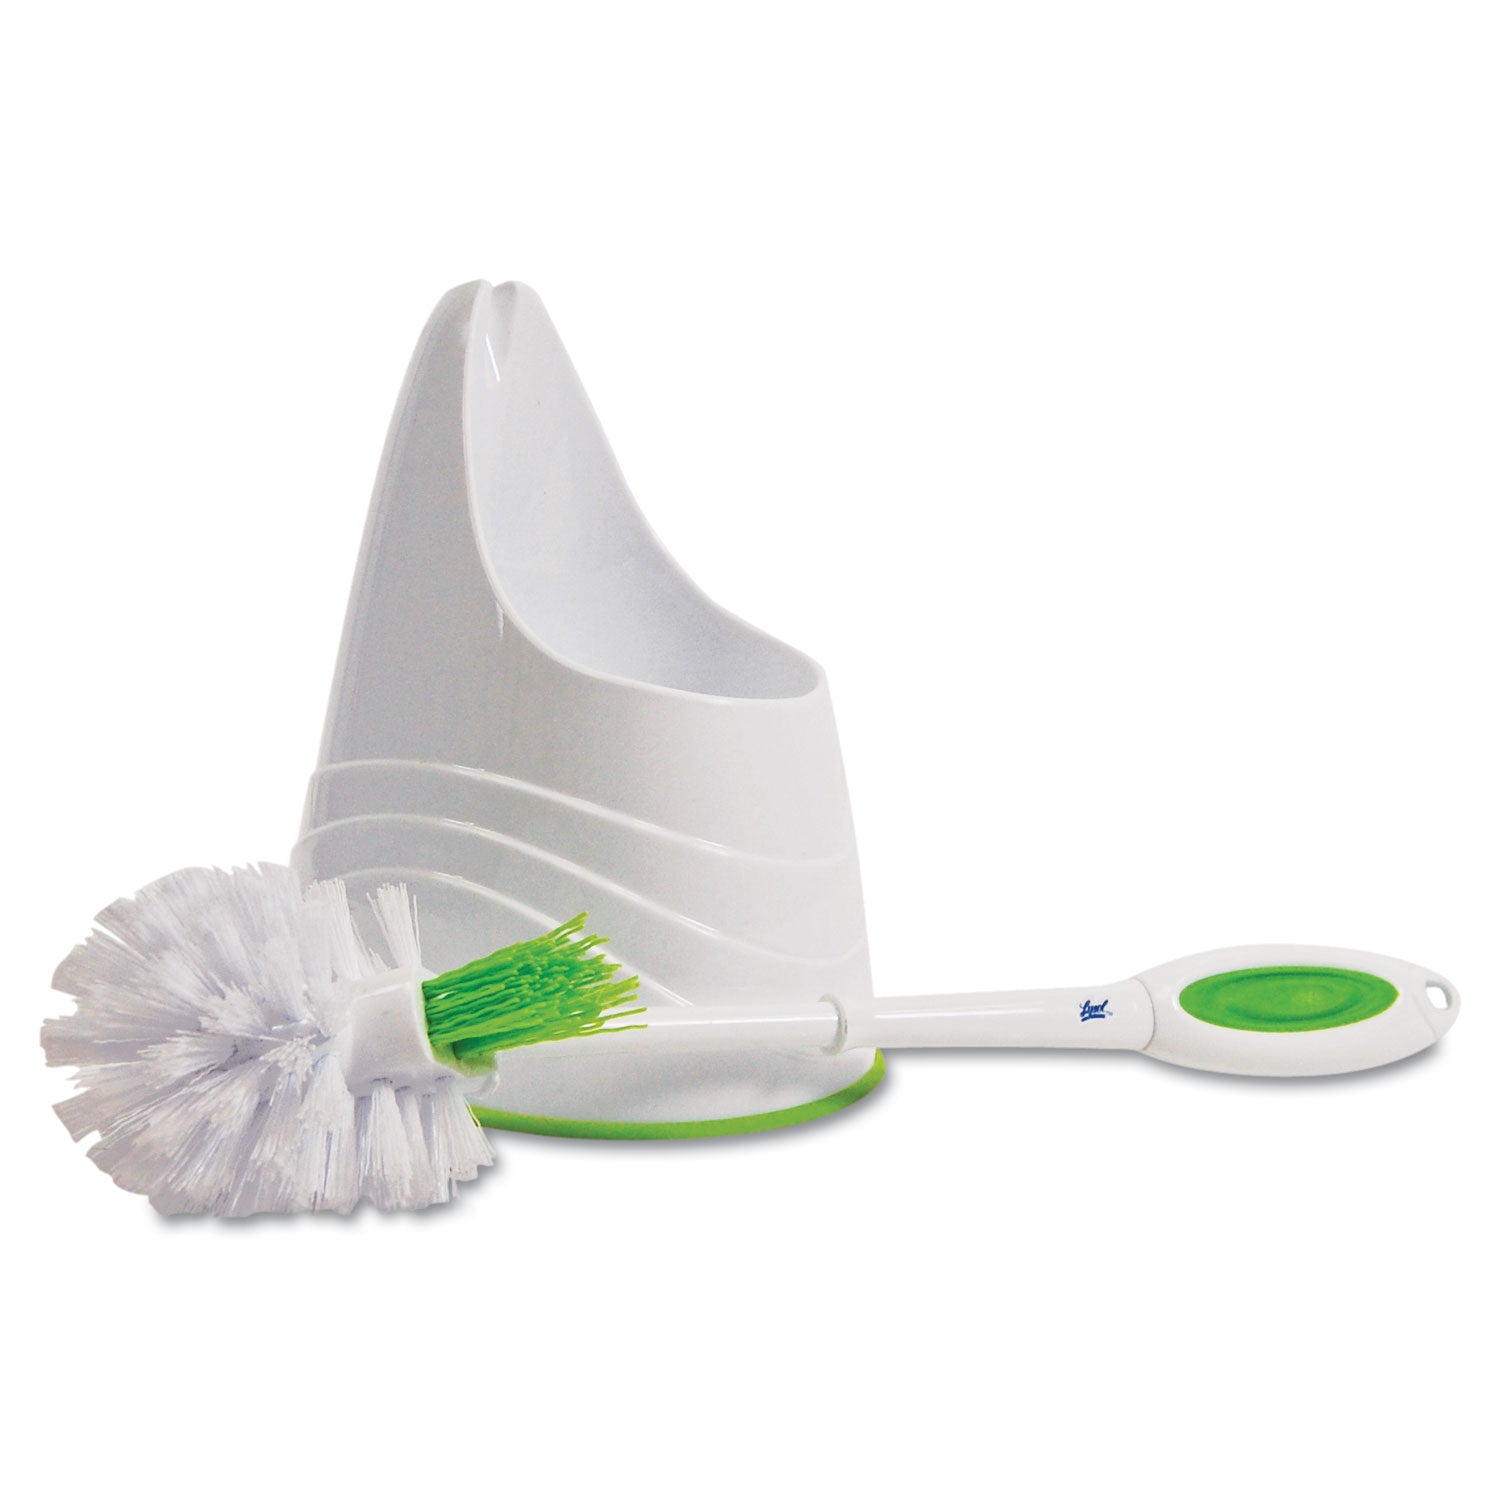 toilet-bowl-and-brush-caddy-125-handle-green_qck2055463 - 1